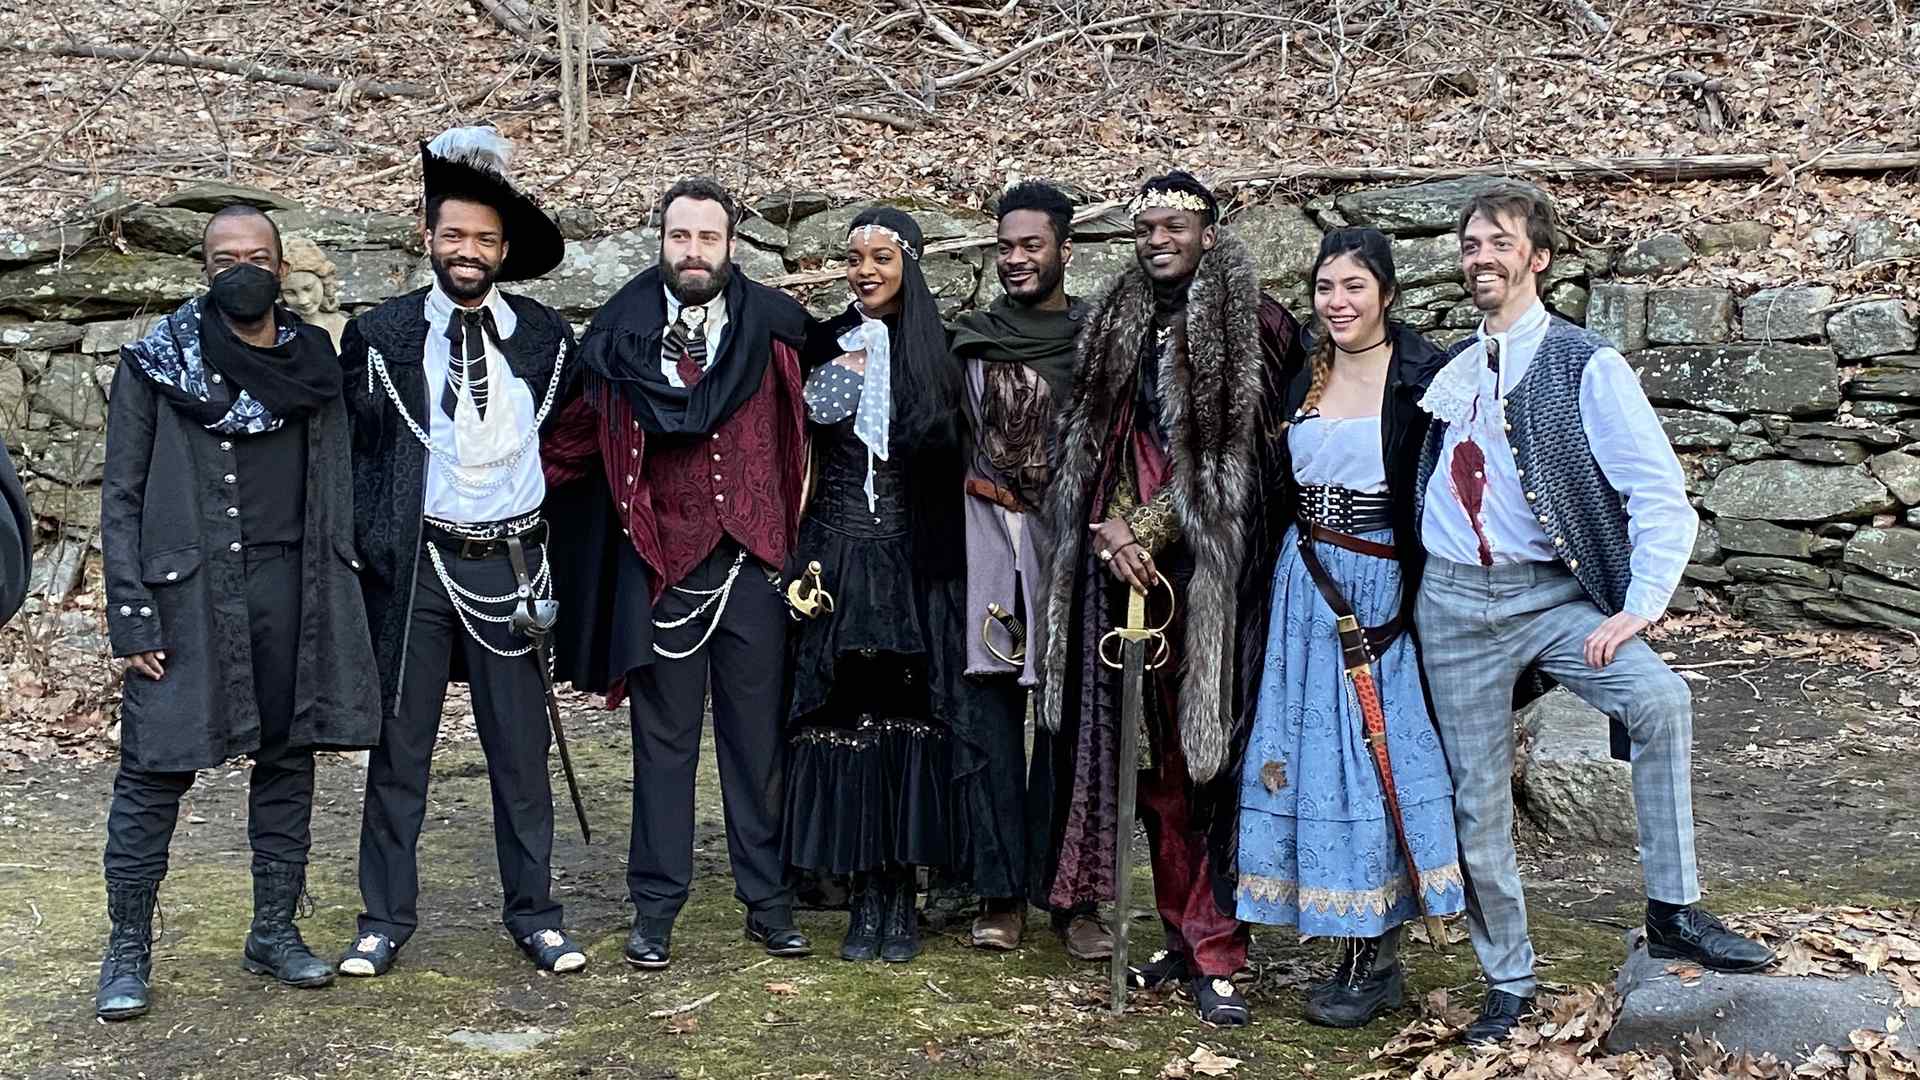 Shaun Patrick Tubbs poses for a photo outside with seven cast members dressed in costume. All can be seen smiling except for Tubbs, who is waring a face covering.